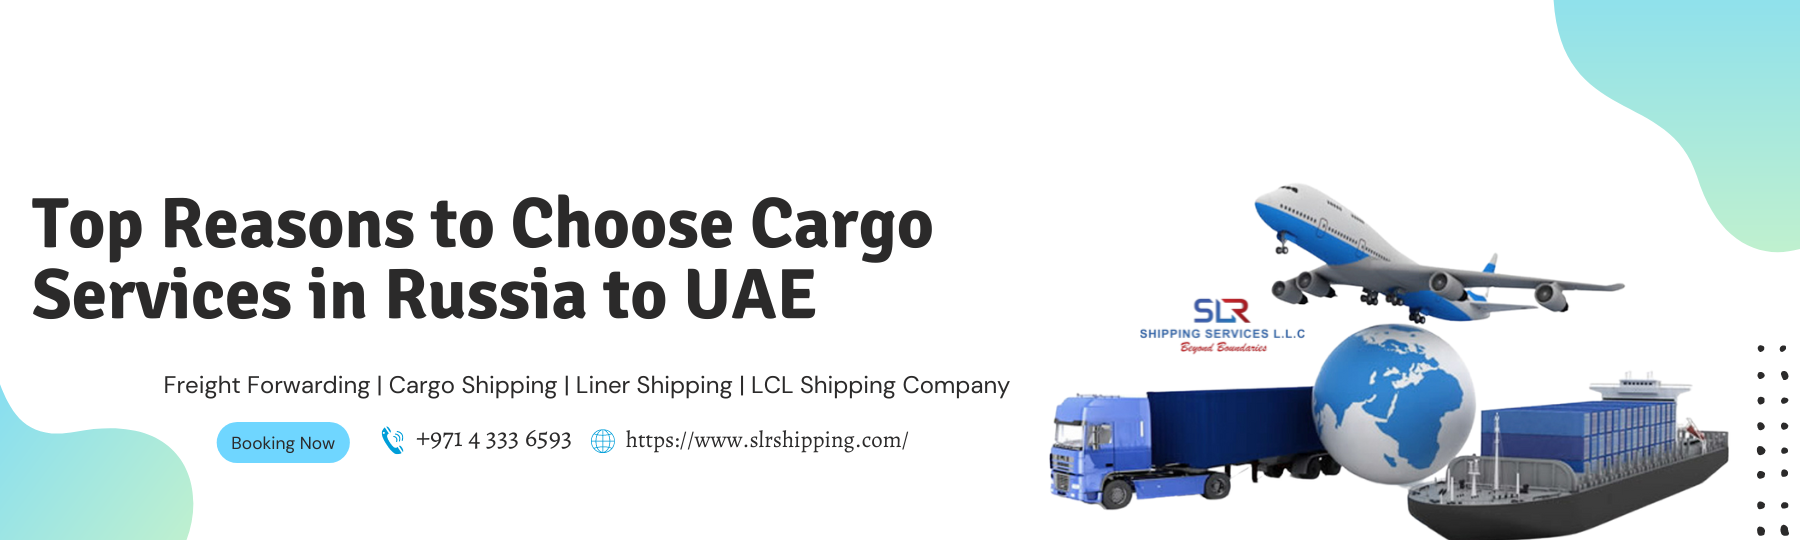 Top Reasons to Choose Cargo Services from Russia to UAE